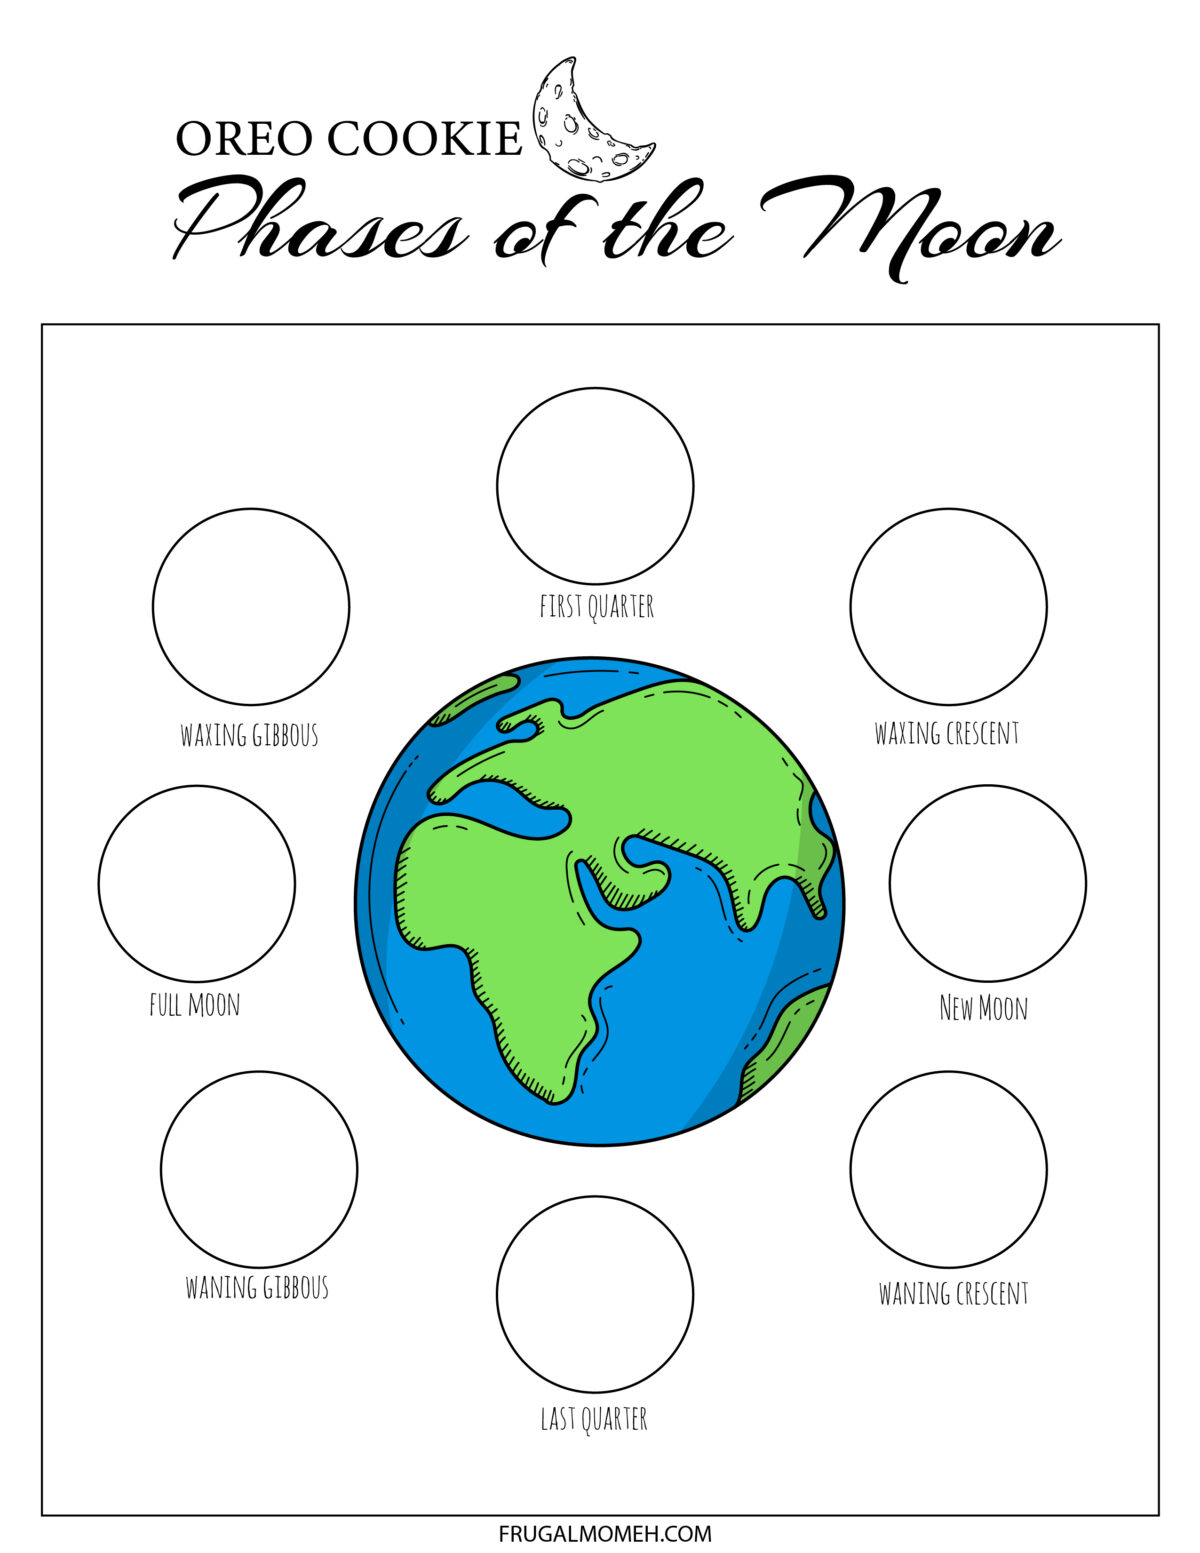 Oreo cookie phases of the moon worksheet